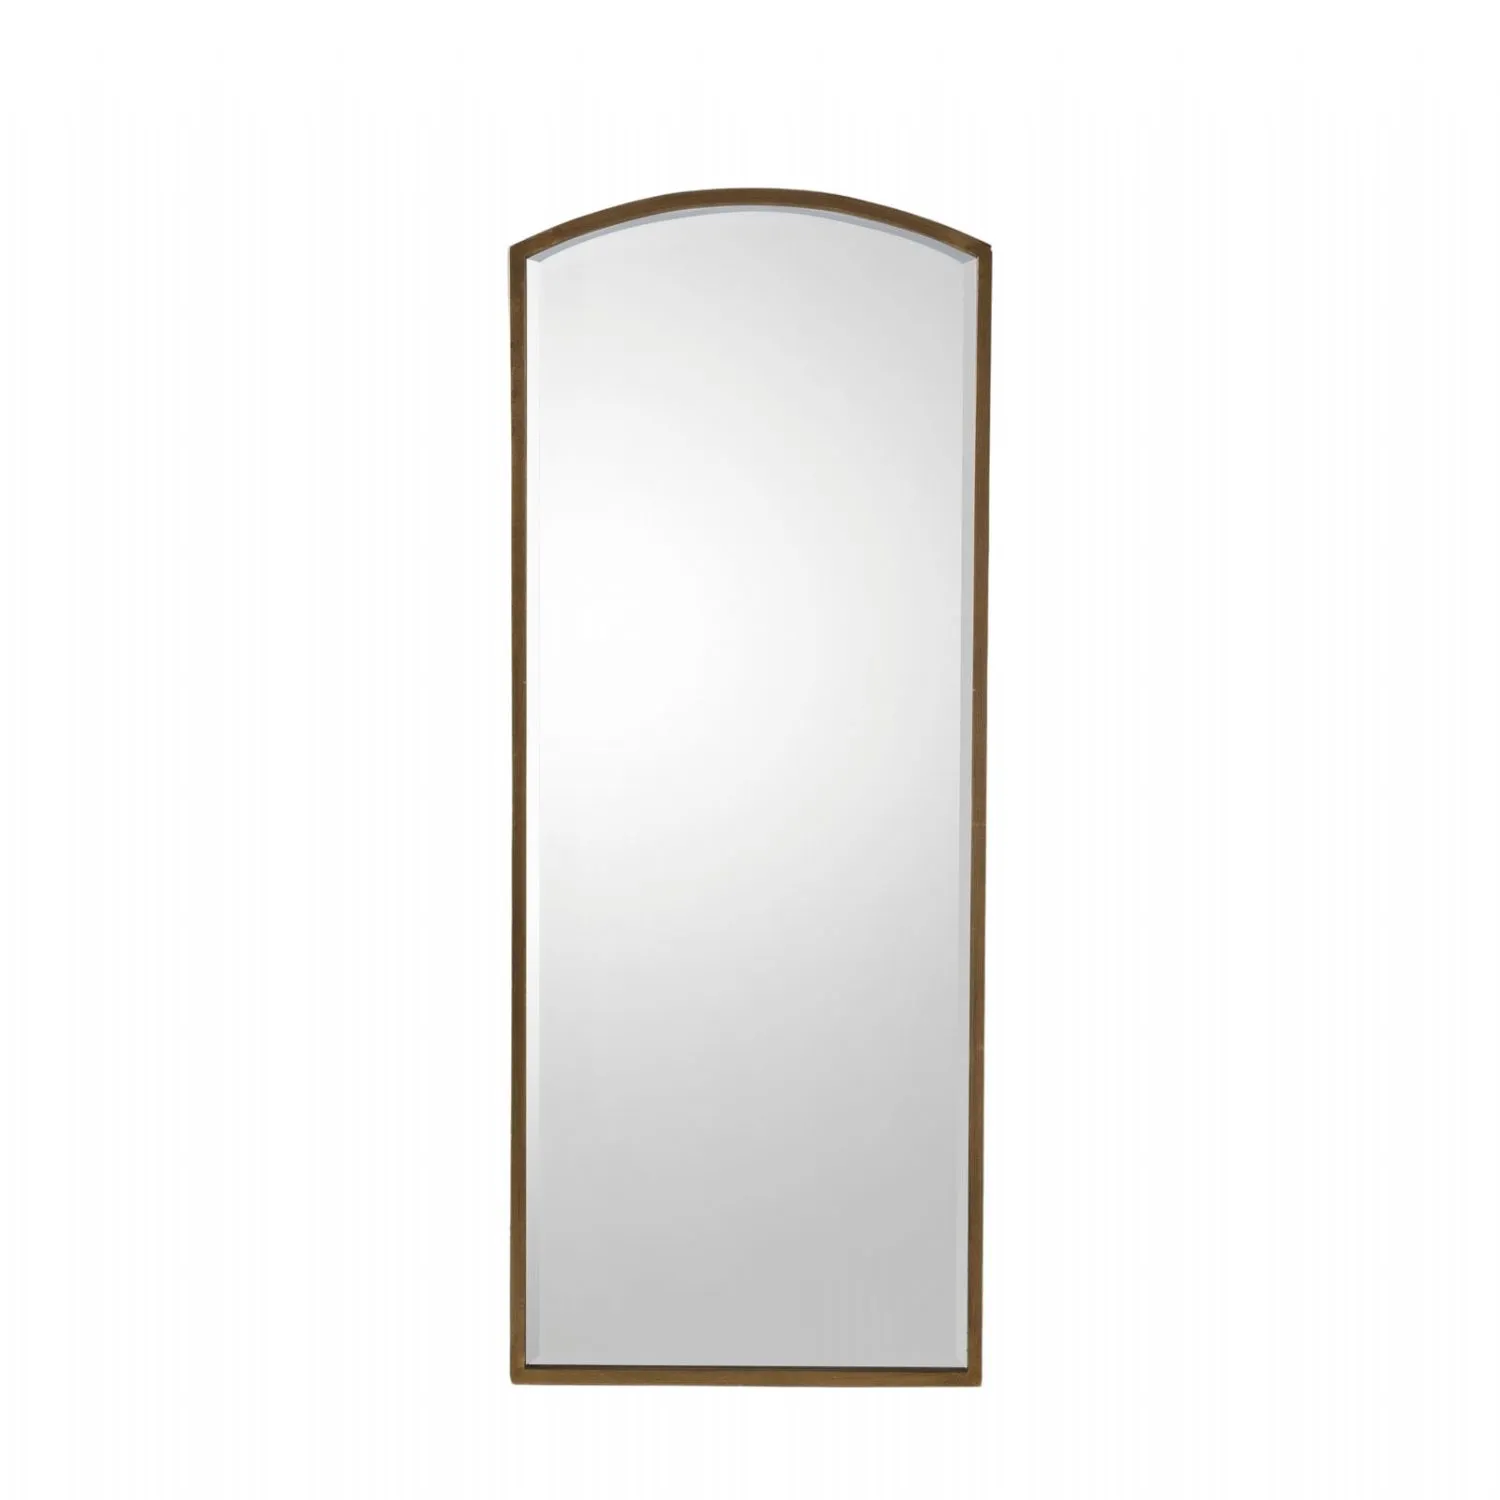 Large Arched Top Rectangular Leaner Mirror in Antique Gold